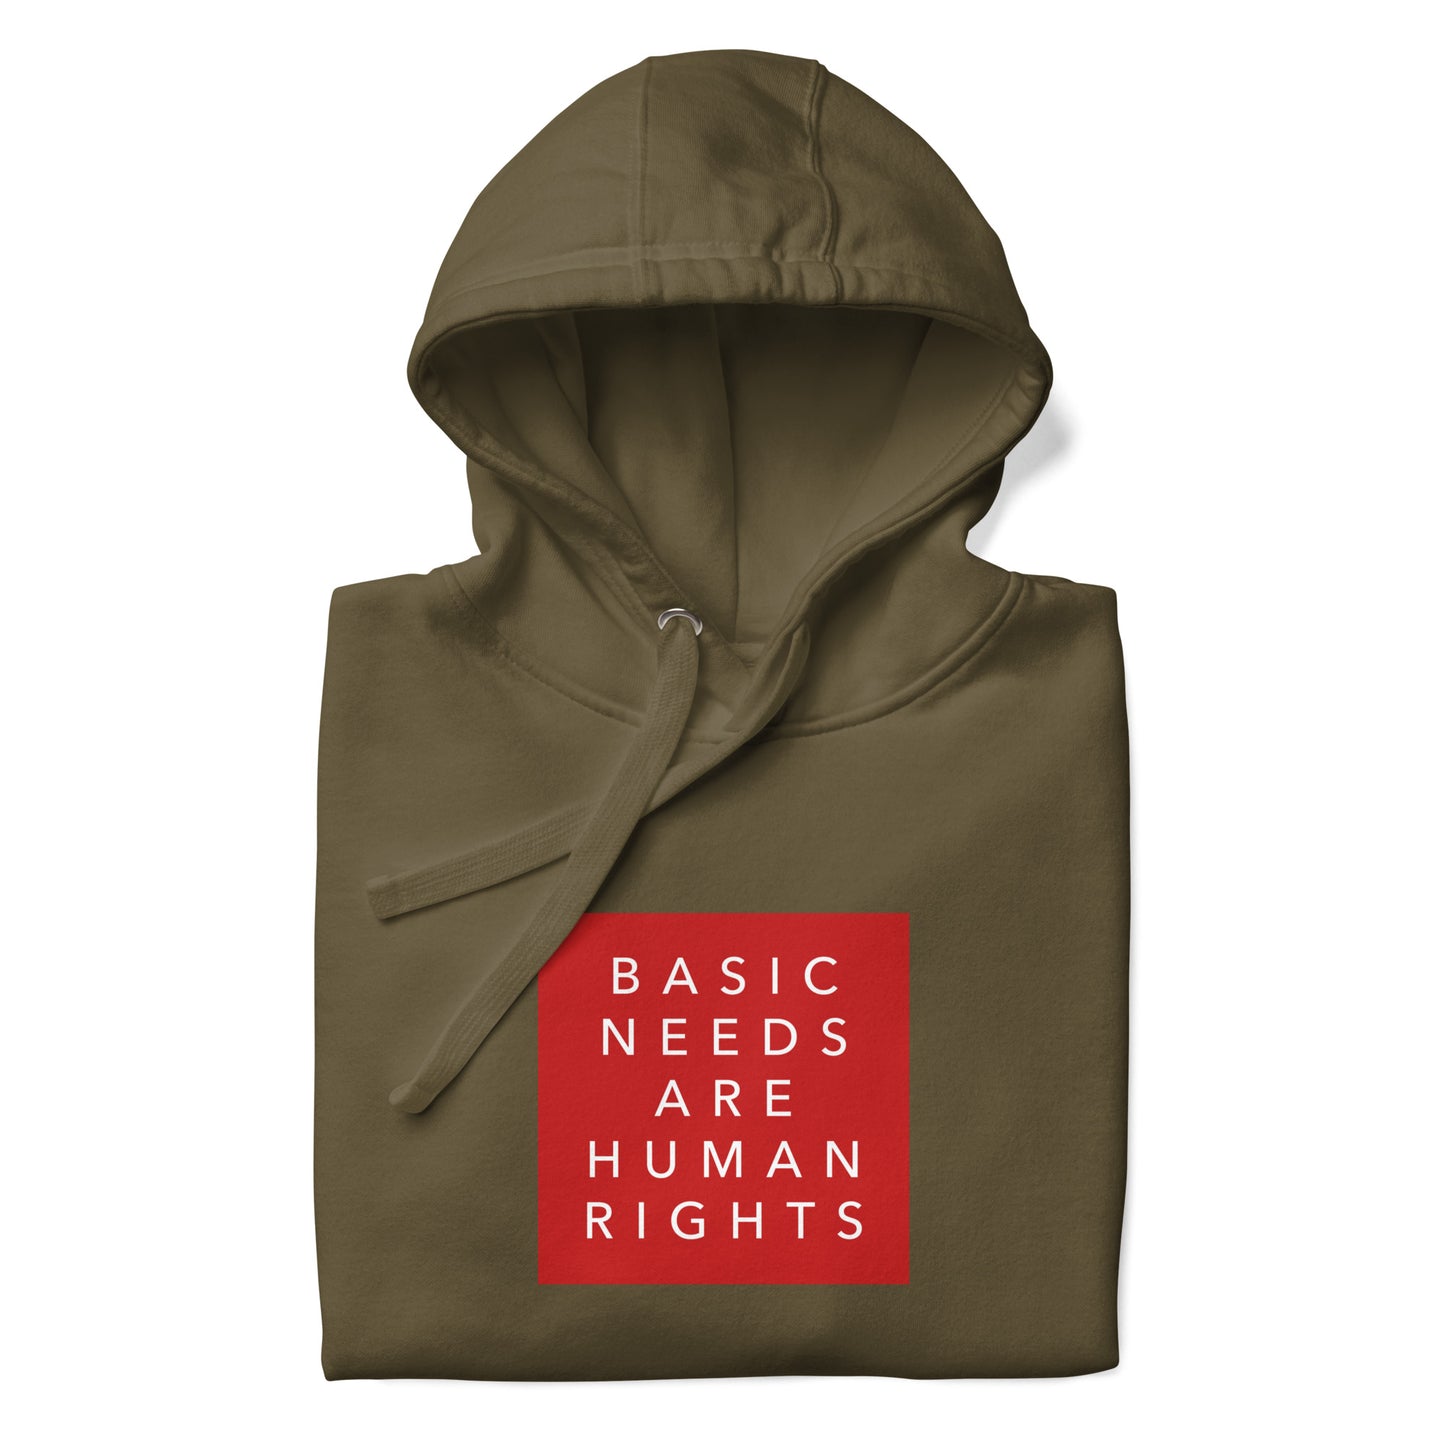 Basic Needs are Human Rights - Unisex Hoodie